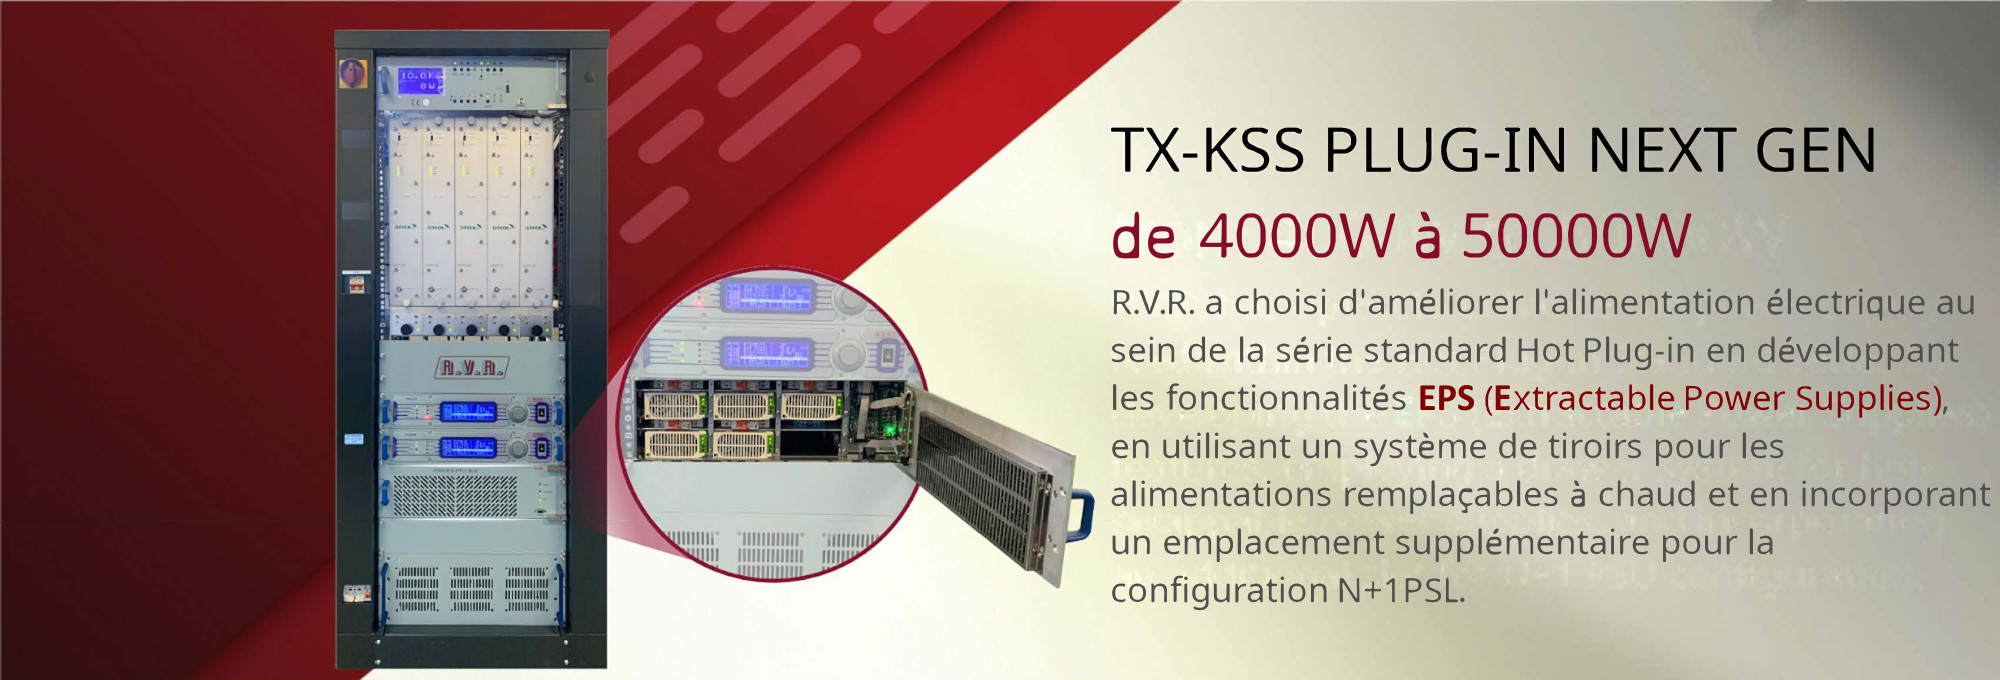 https://www.rvr.it/fr/products/scalable-trasmitters/ts-kss-next-generatione-series/